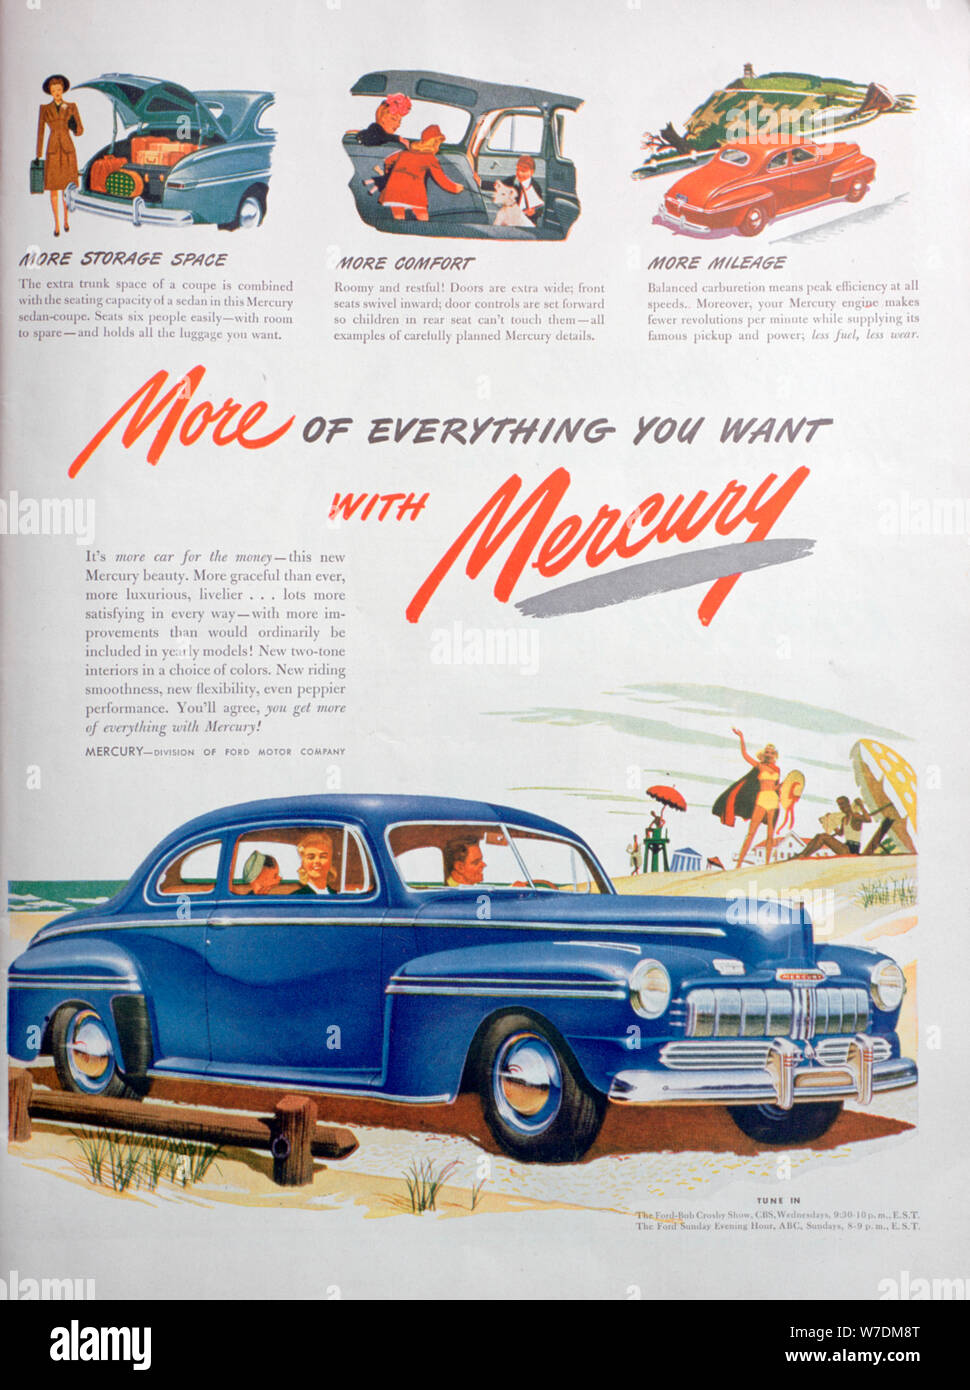 Advert for Mercury motor cars, 1946. Artist: Unknown Stock Photo